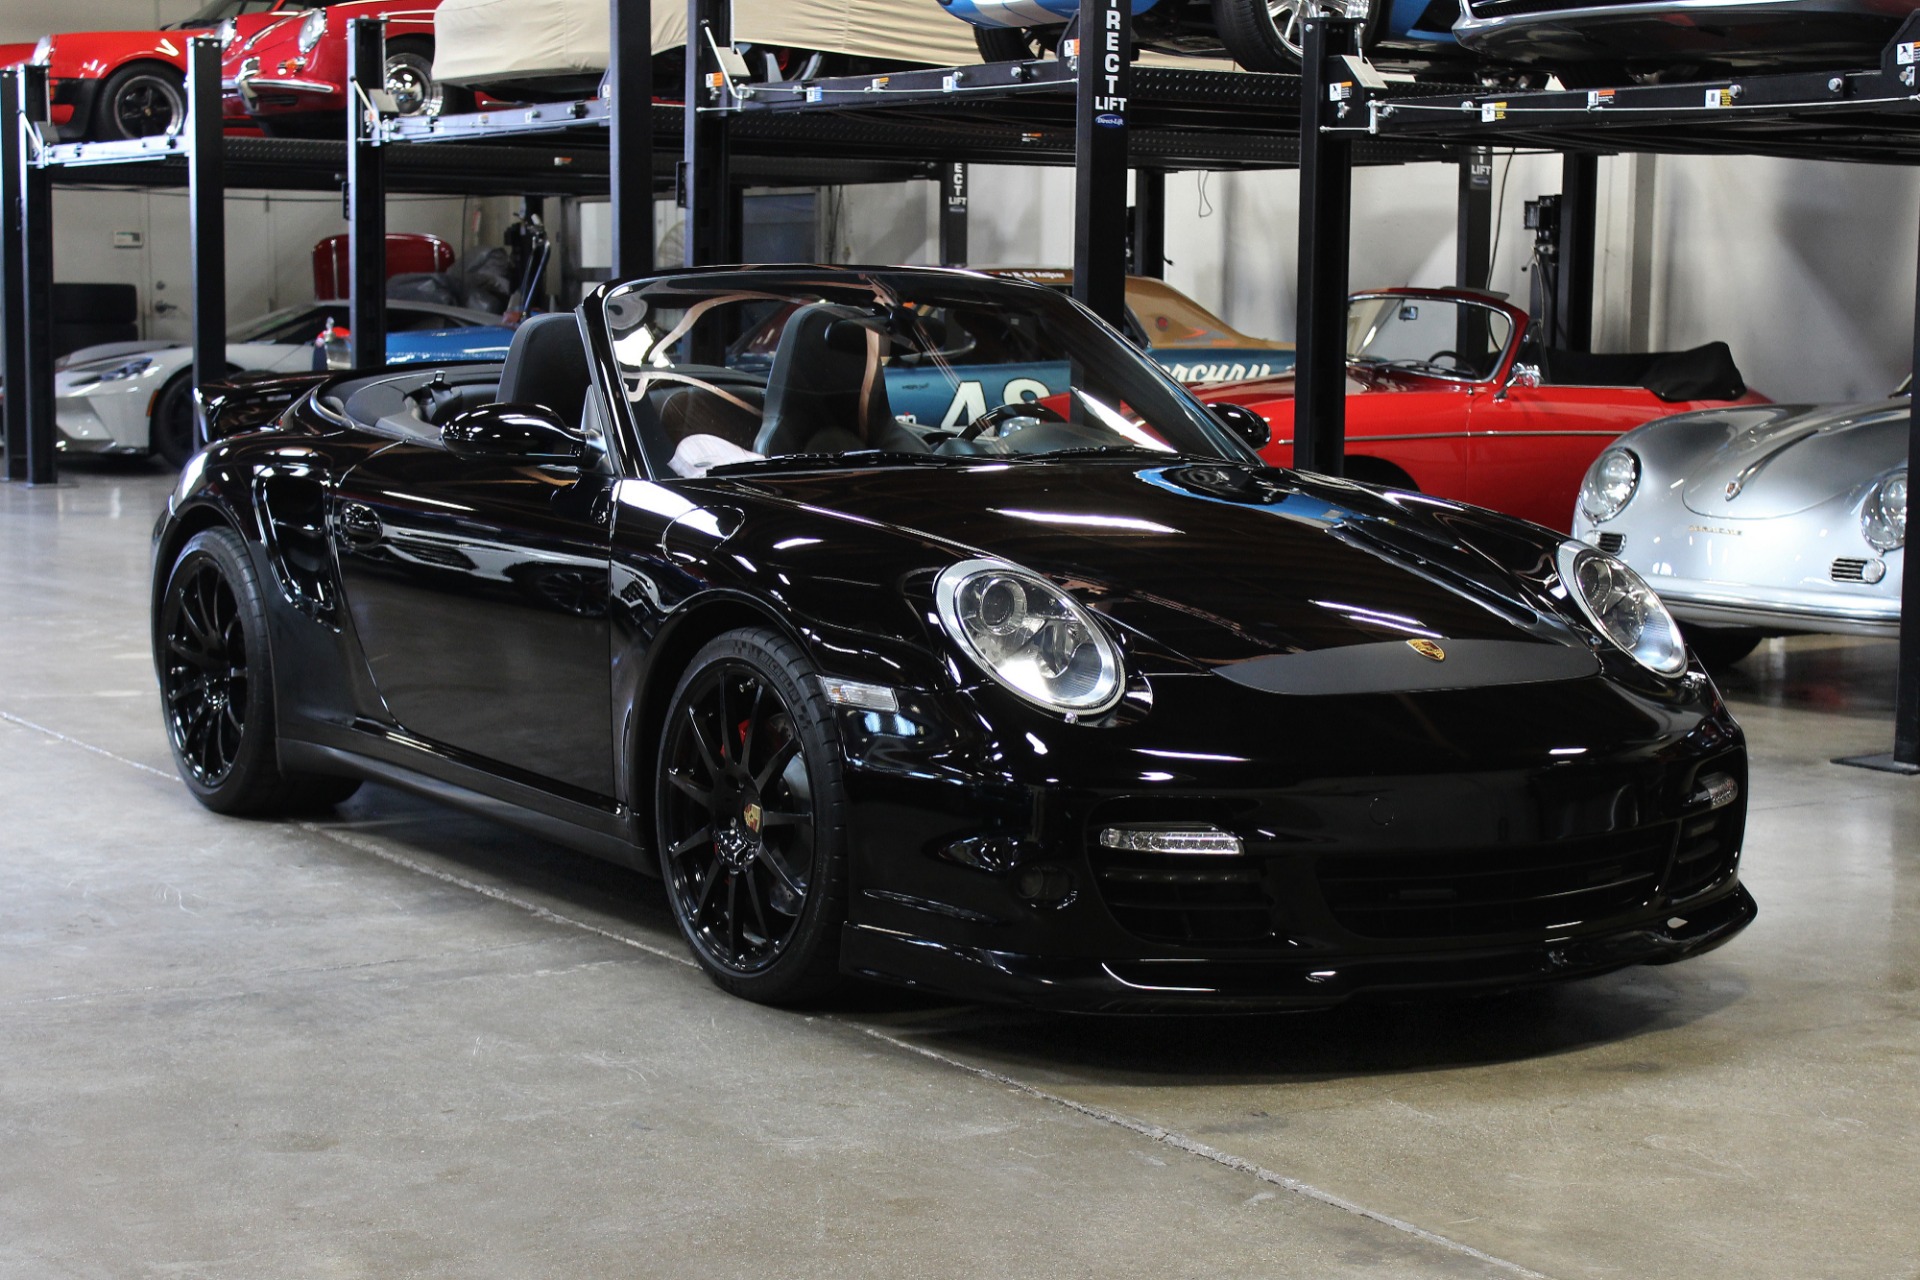 Used 2009 Porsche 911 Turbo for sale $82,995 at San Francisco Sports Cars in San Carlos CA 94070 1